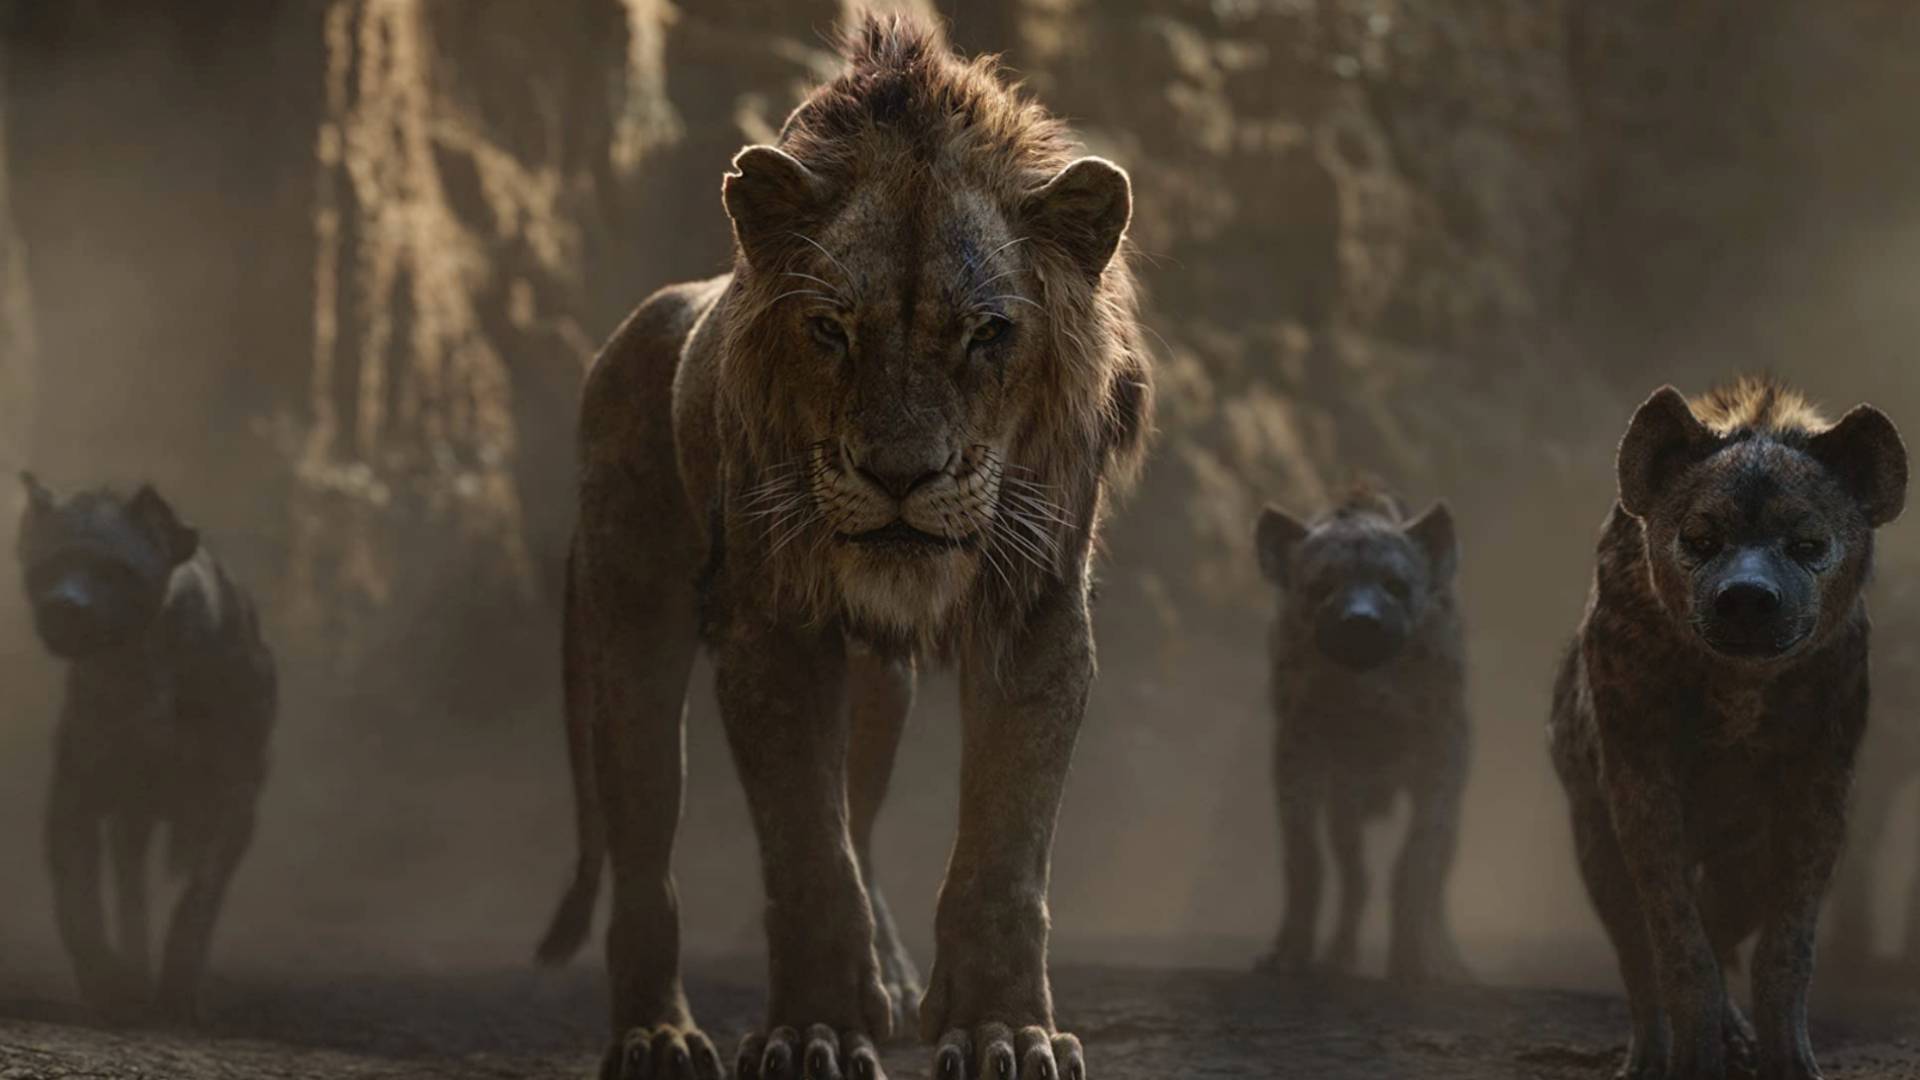 The Lion King prequel actor says Scar's backstory will be explored